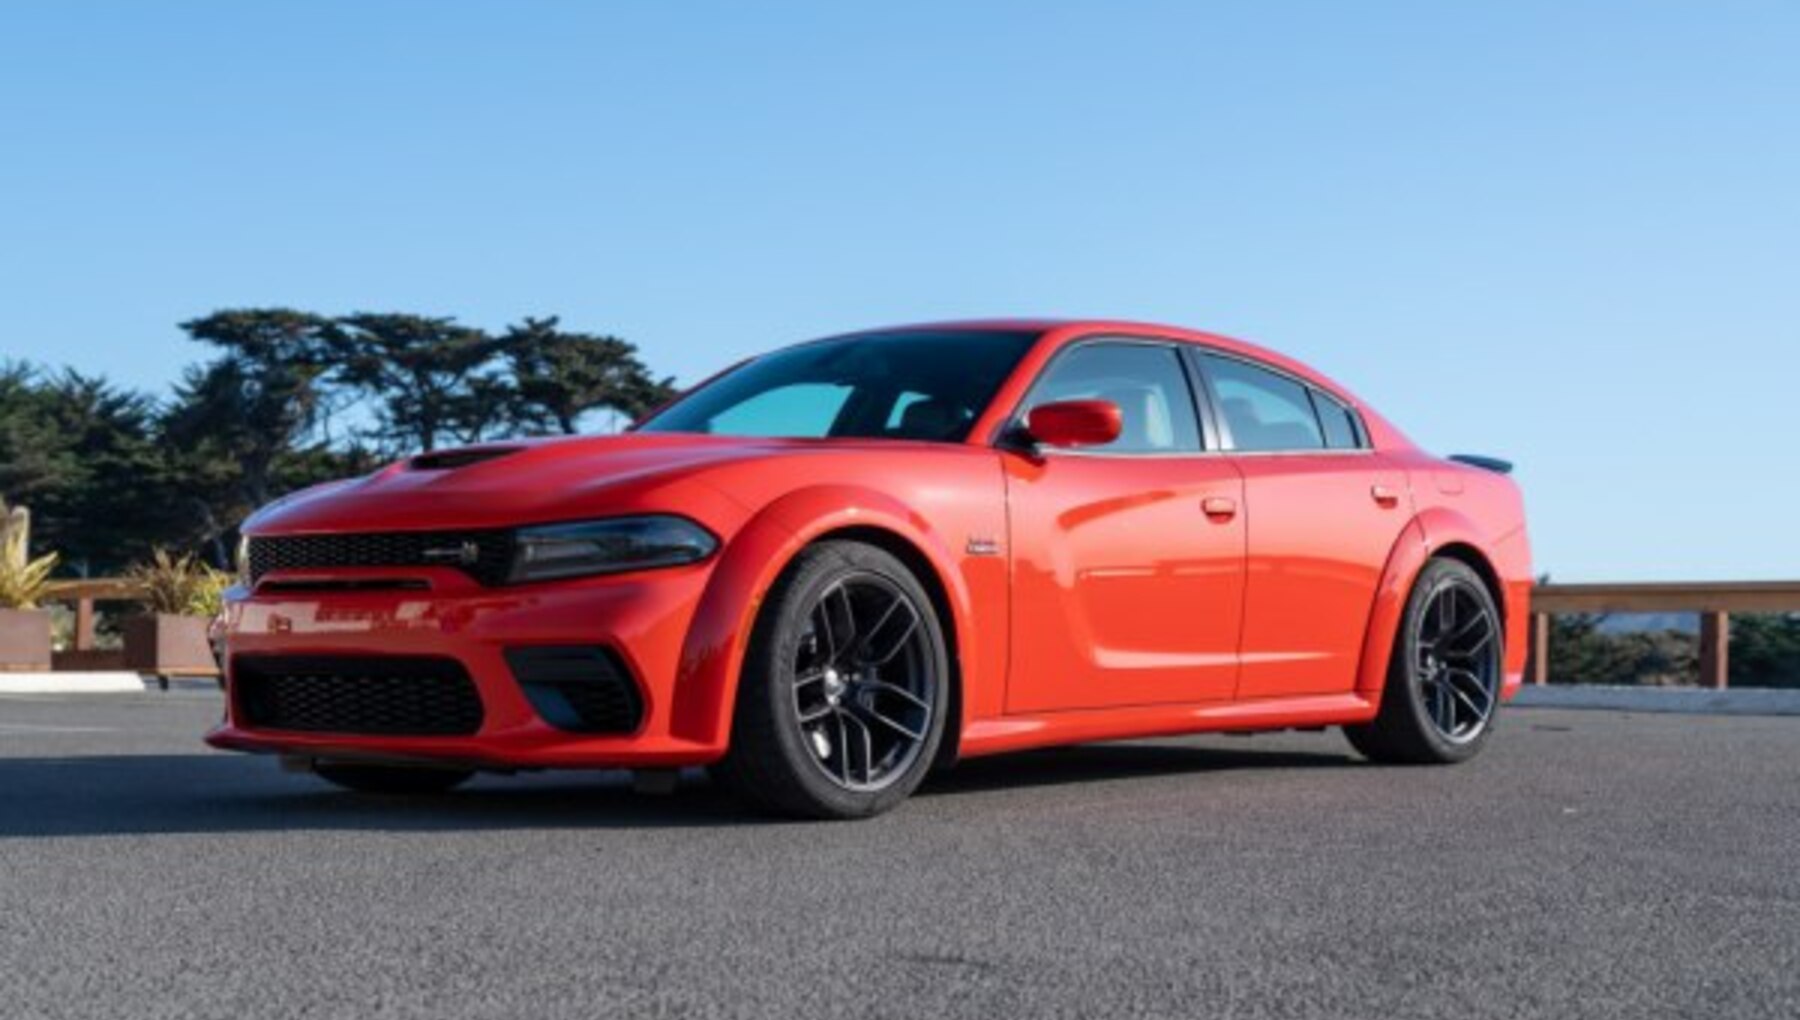 Dodge Charger VII (LD; facelift 2019) Scat Pack 6.4 HEMI V8 (485 Hp) Wide Body Automatic 2019, 2020, 2021 